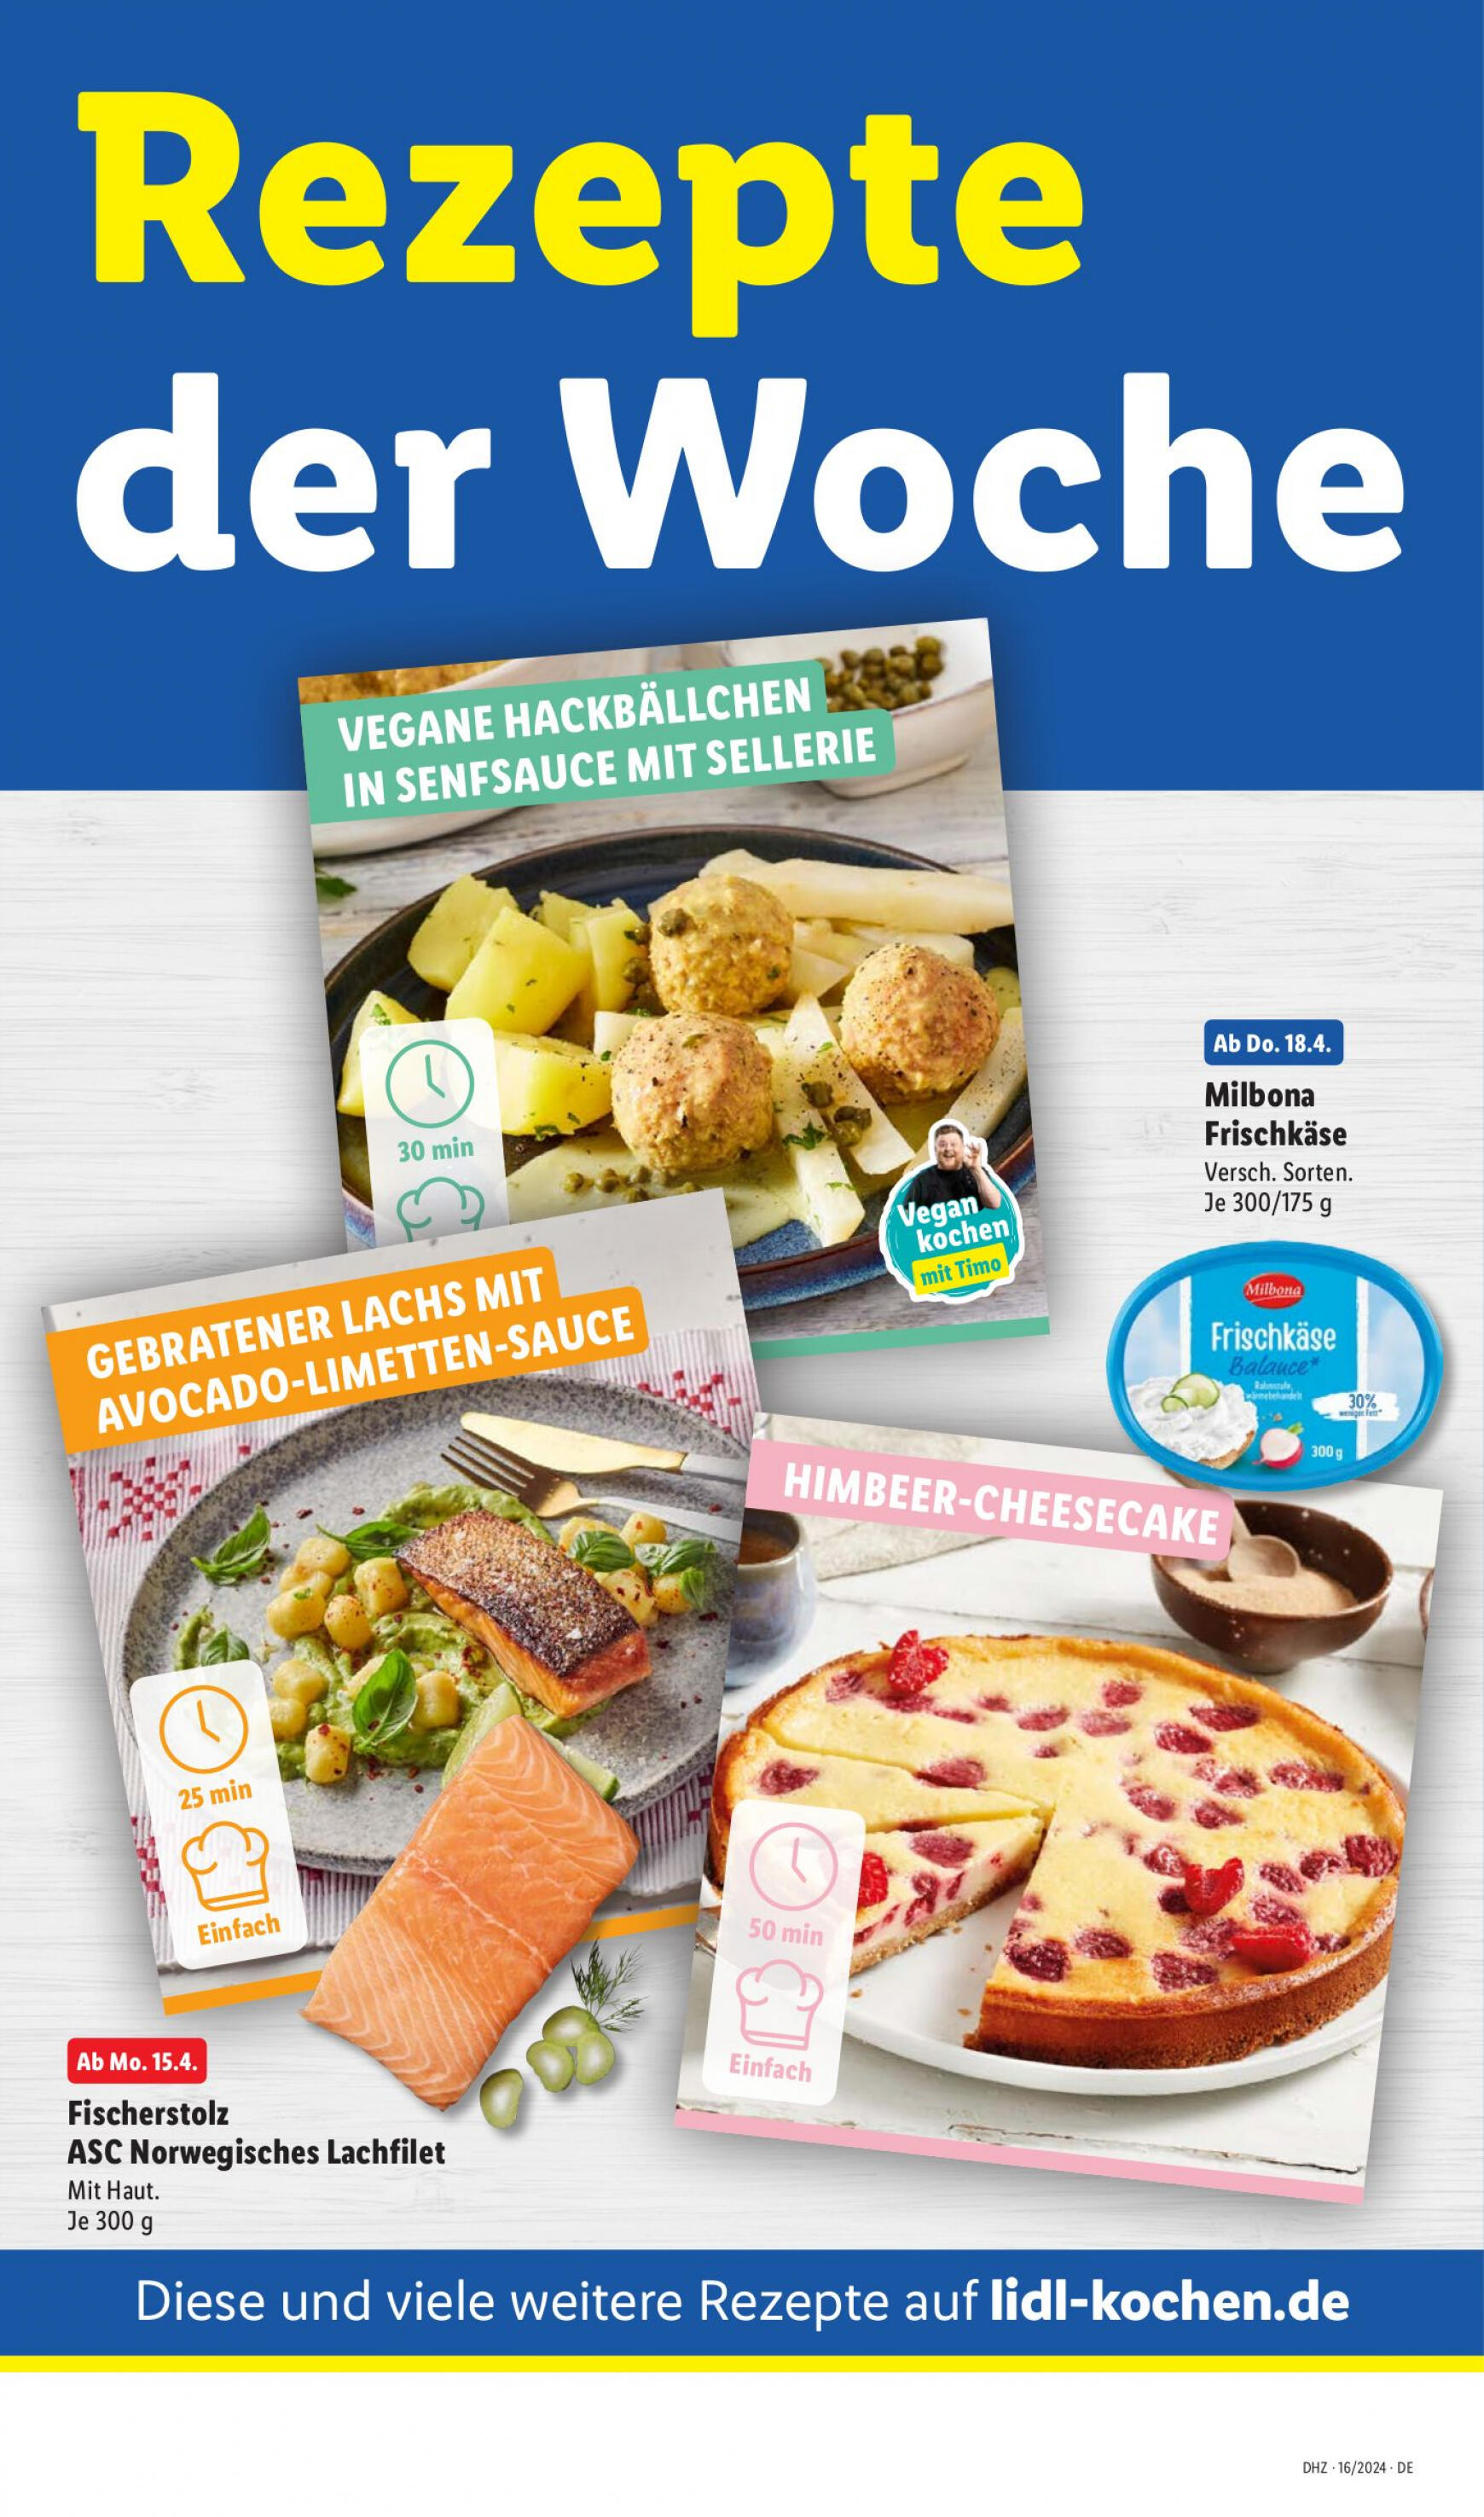 lidl - Flyer Lidl aktuell 15.04. - 20.04. - page: 55